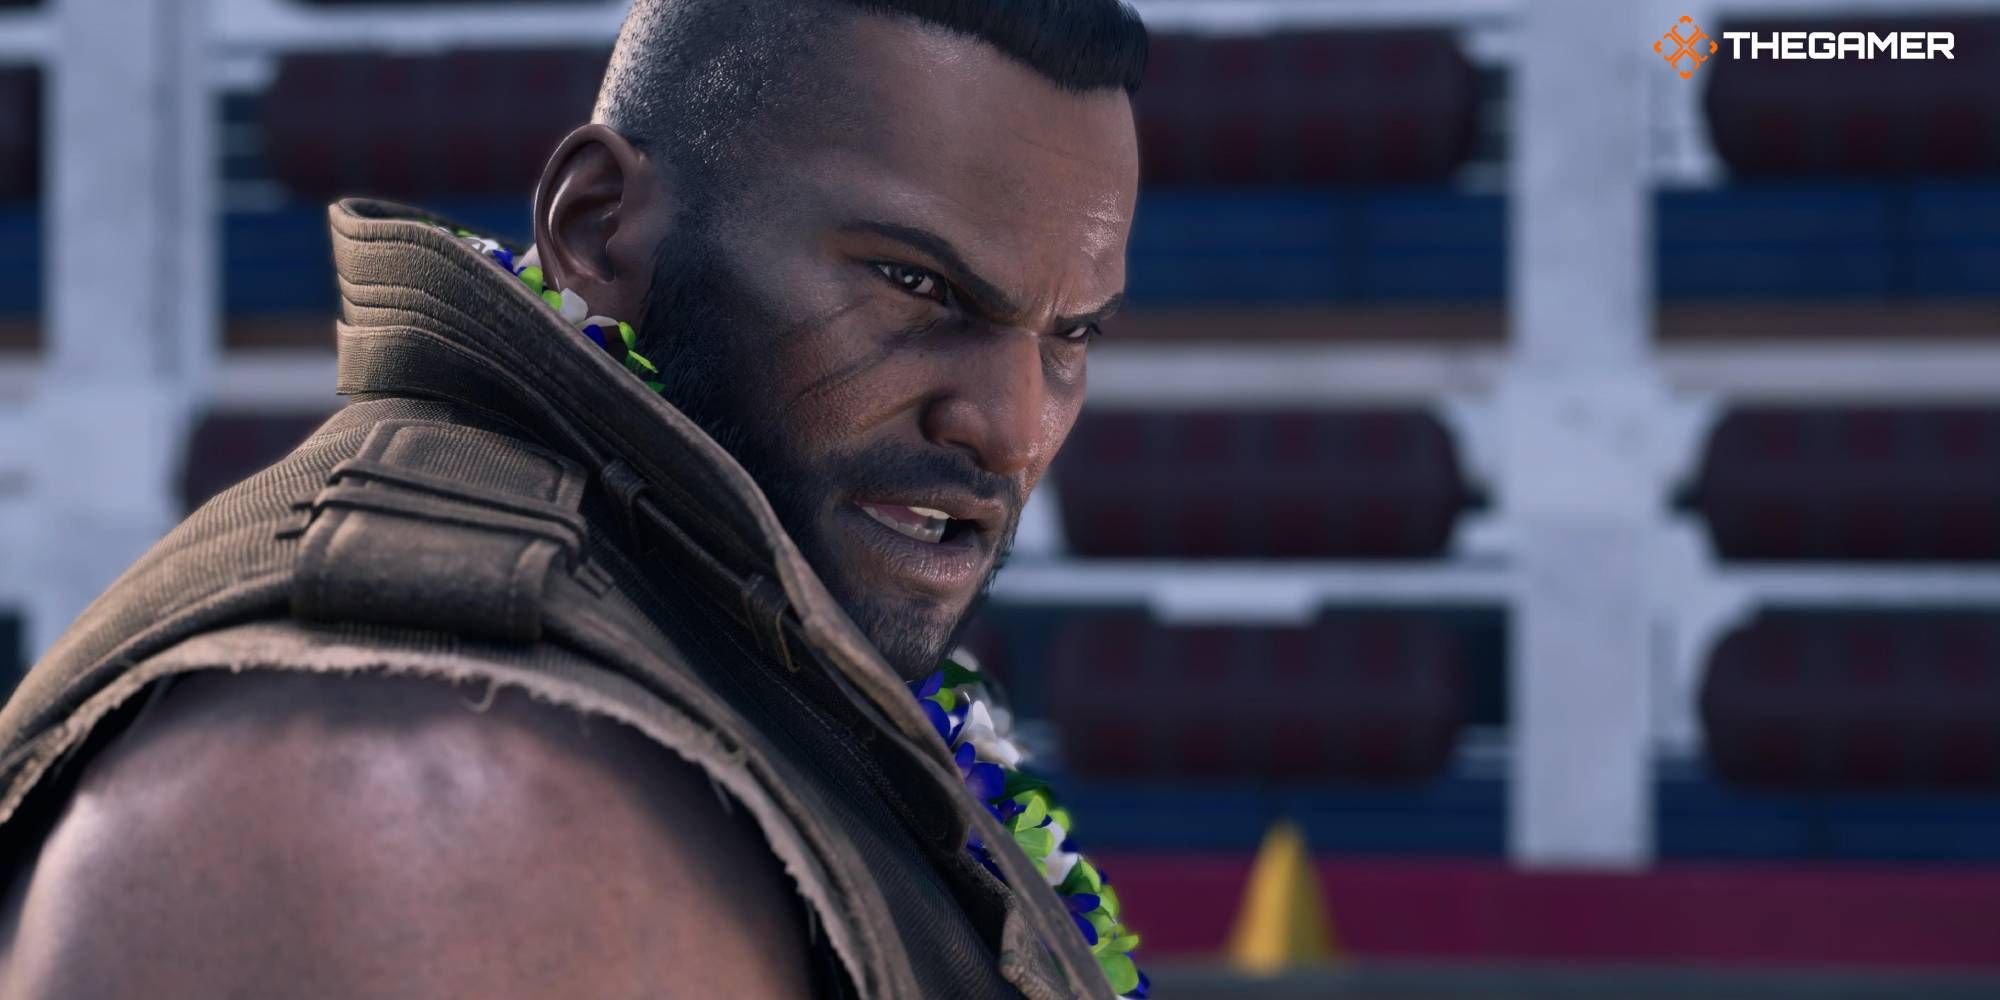 Final Fantasy 7 Rebirth feature image of Barret Wallace wearing a lei in Costa del Sol